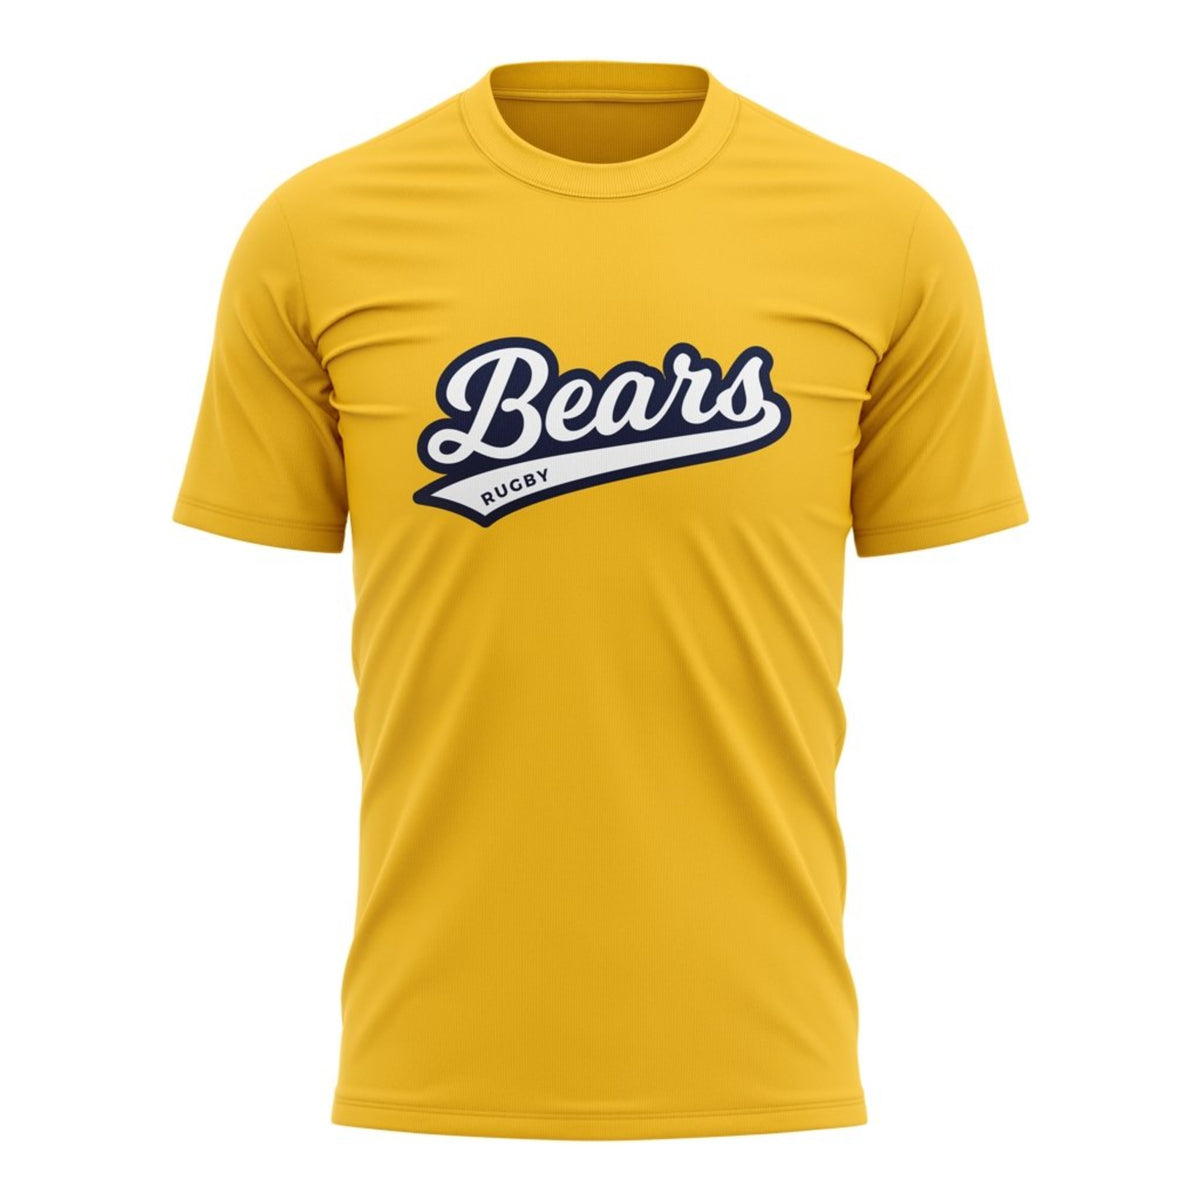 BC Rugby 2021 &quot;Bears&quot; Tee - Men&#39;s White/Gold - www.therugbyshop.com www.therugbyshop.com MEN&#39;S / GOLD / S XIX Brands TEES BC Rugby 2021 &quot;Bears&quot; Tee - Men&#39;s White/Gold